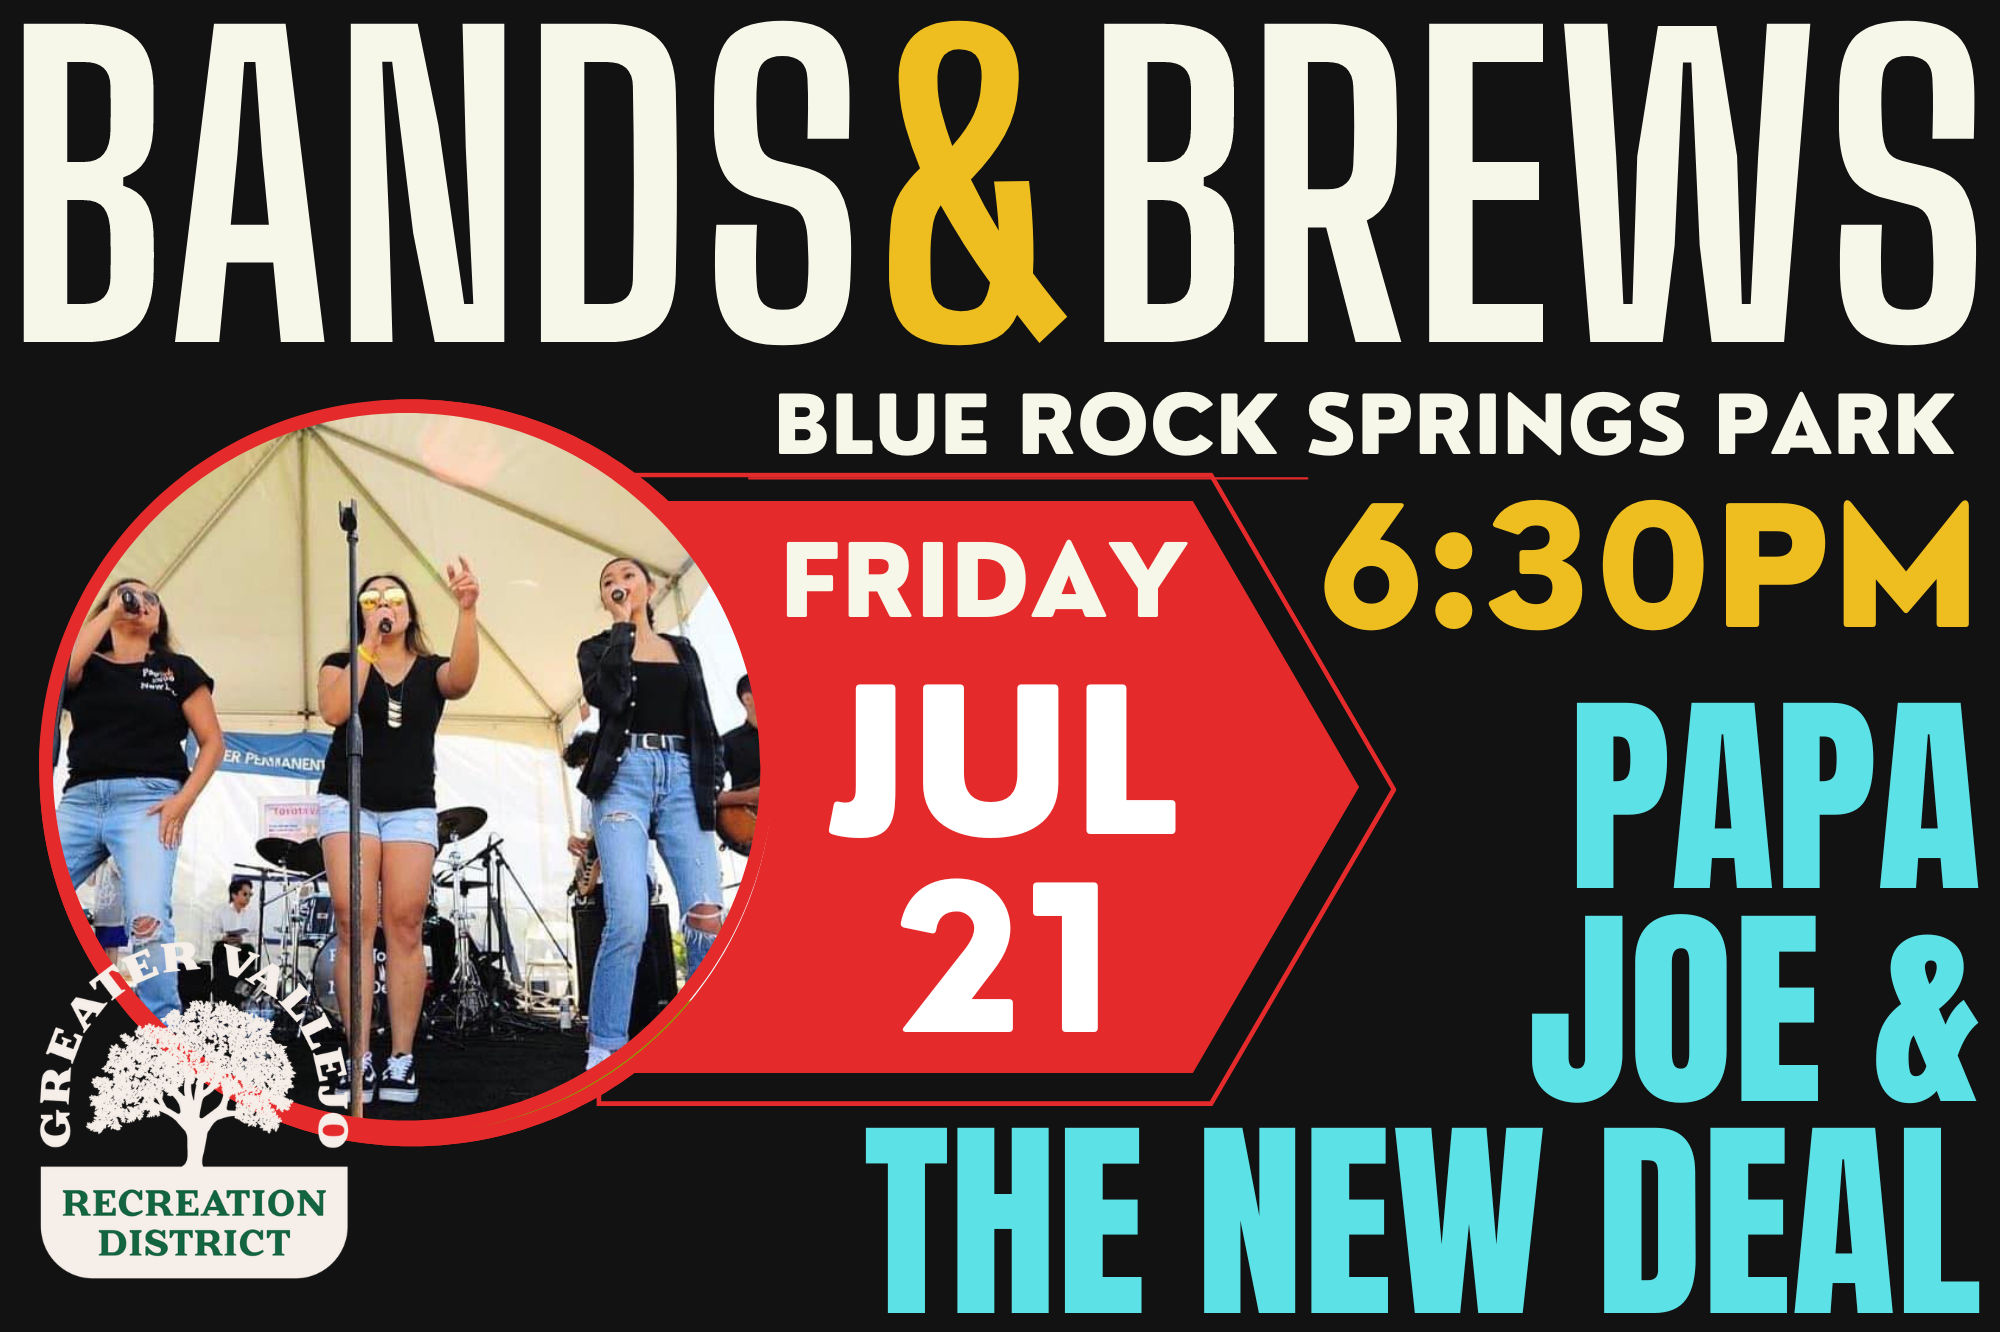 Papa Joe and the new deal -bands and brews event